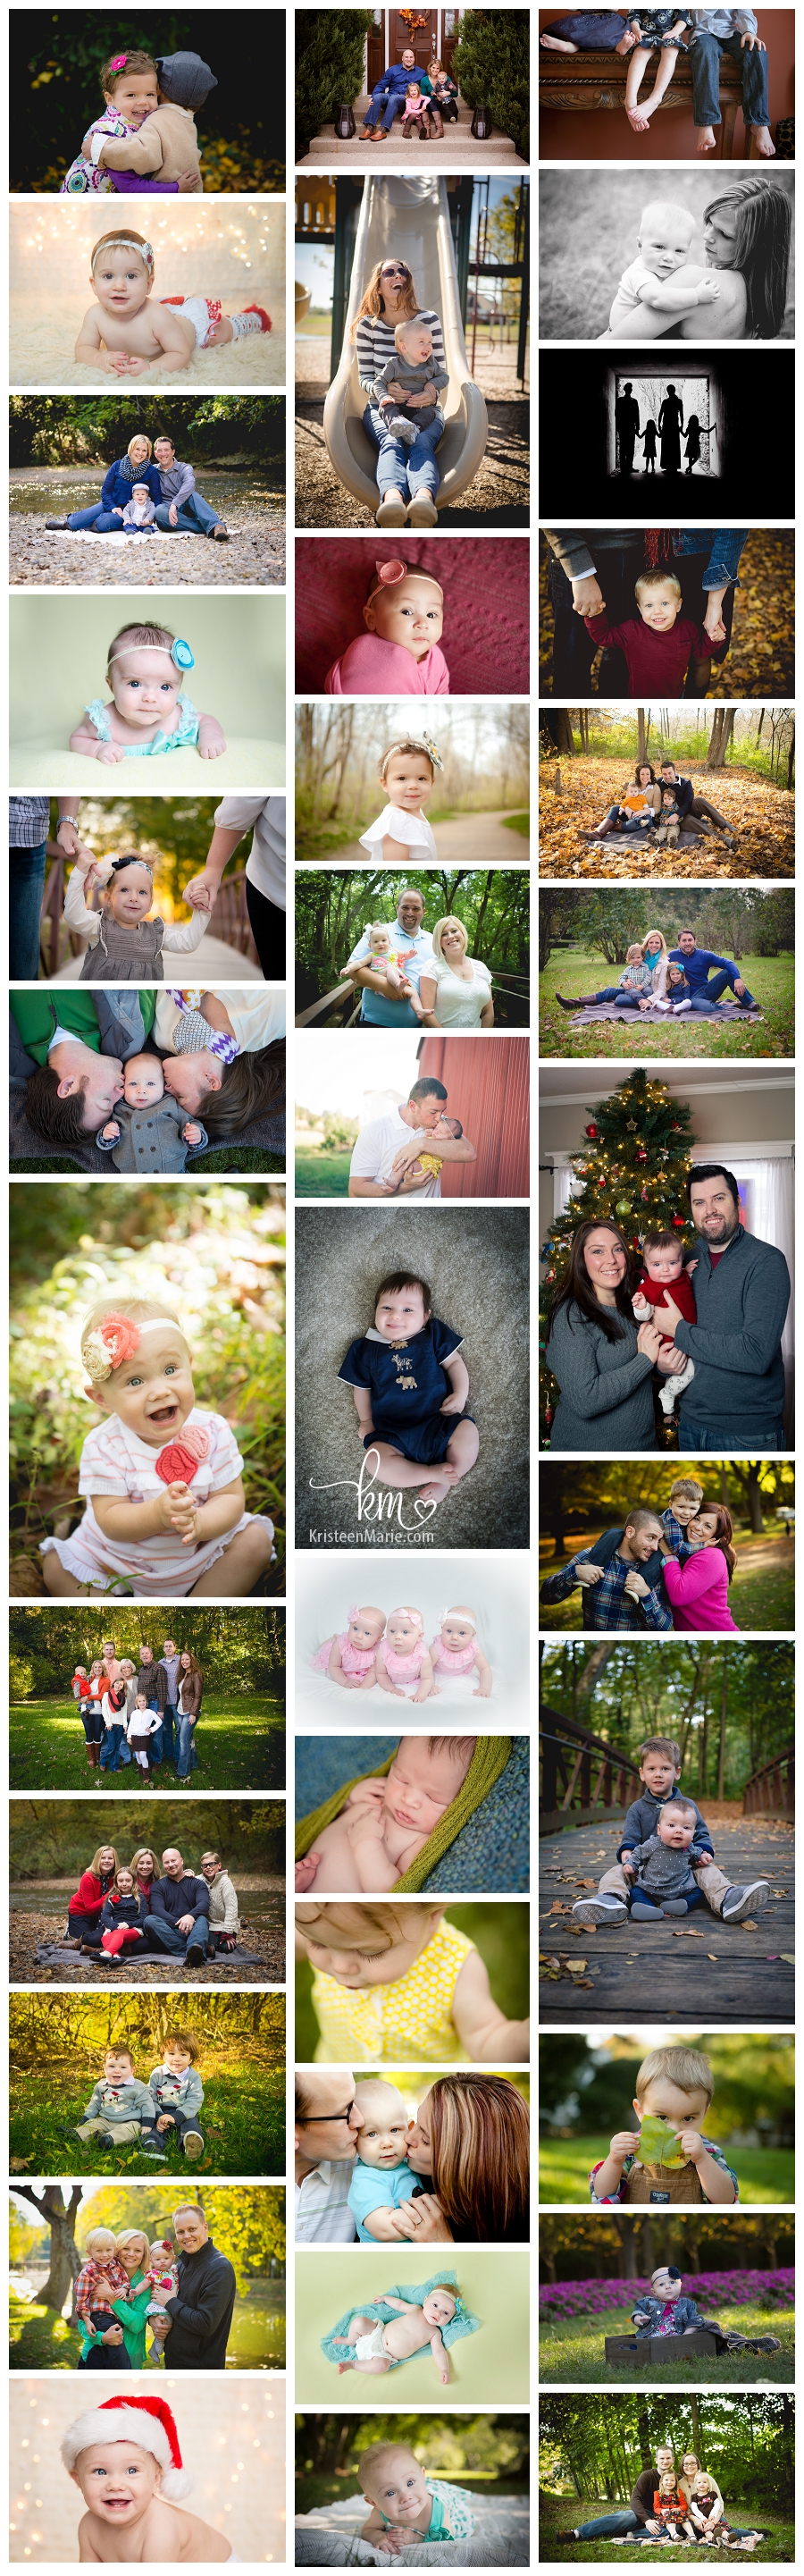 Family photography in Indianapolis